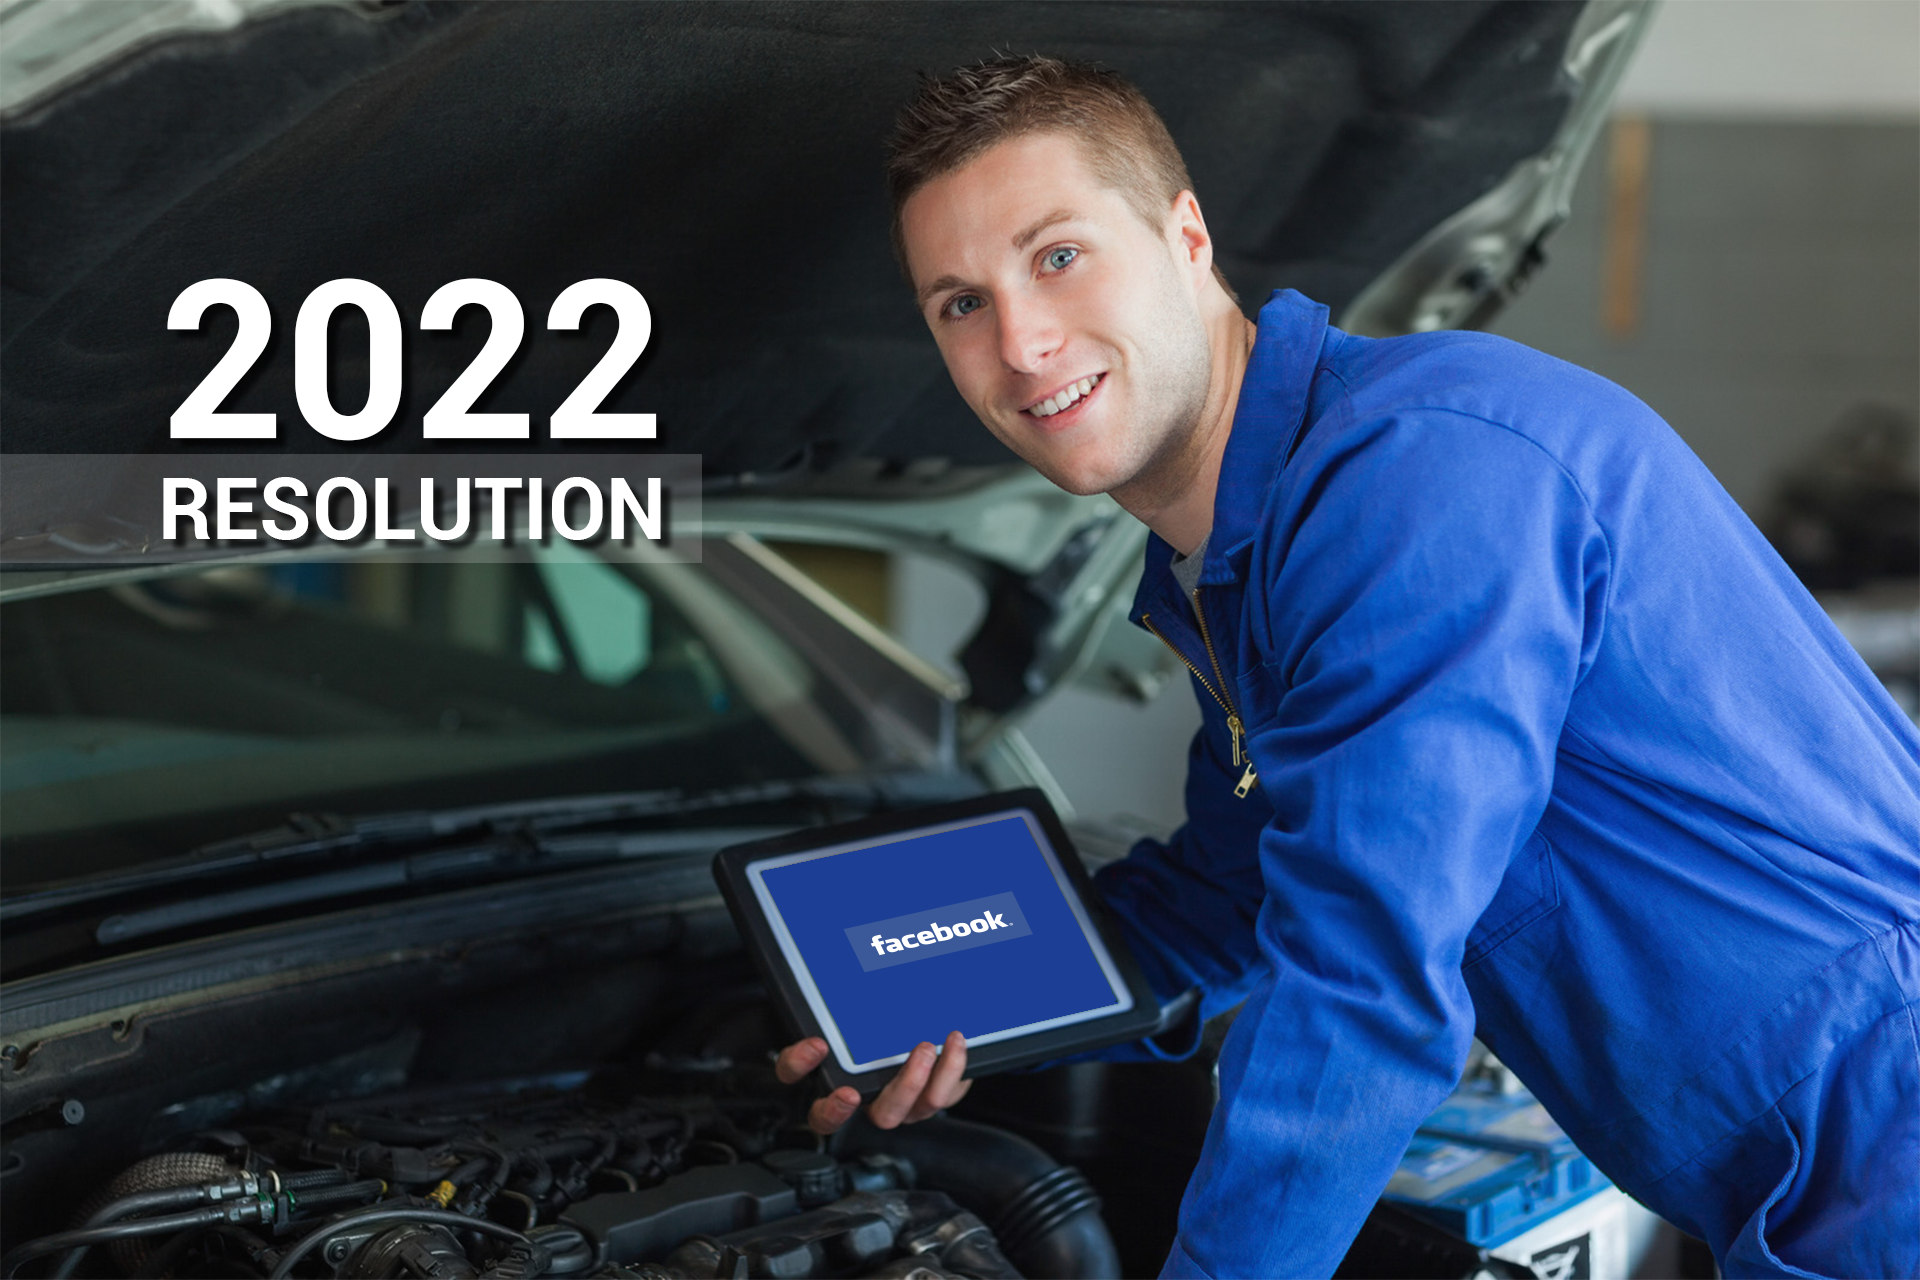 Garages and Auto Centres, Make Sure to Optimize Your Facebook Page in 2022